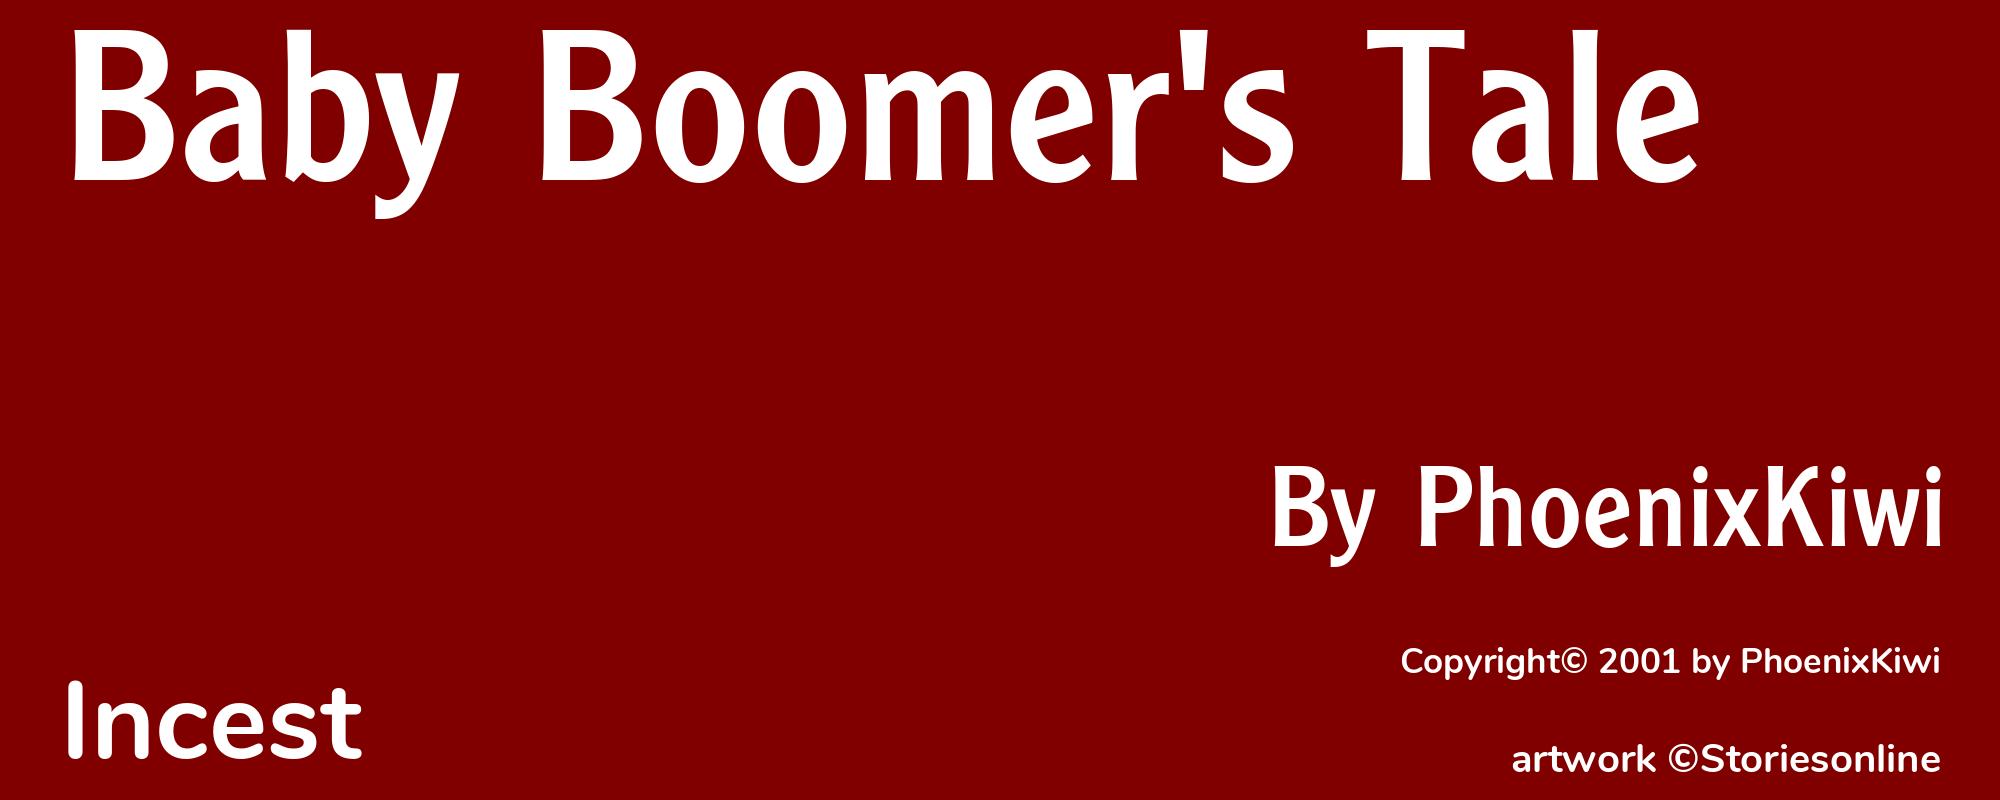 Baby Boomer's Tale - Cover